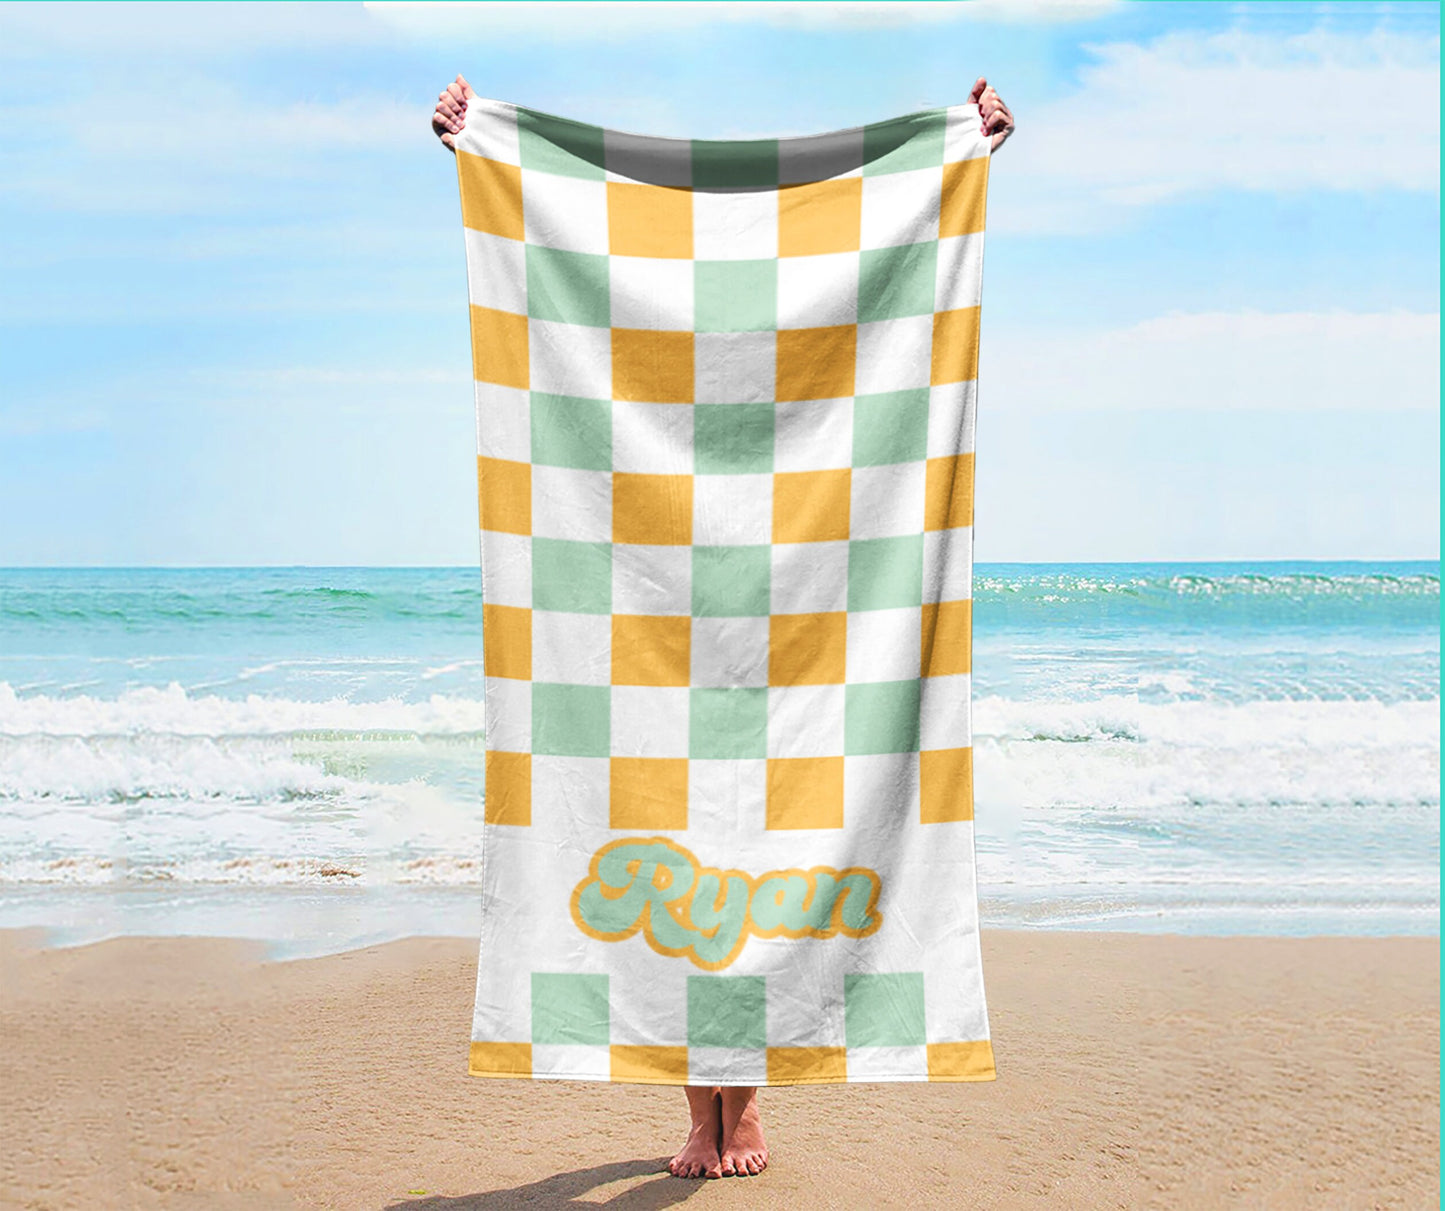 NEW Design Large Personalized Beach Towel Personalized Name Bath Towel Custom Towel Beach Towel With Name Outside Birthday Vacation Gift